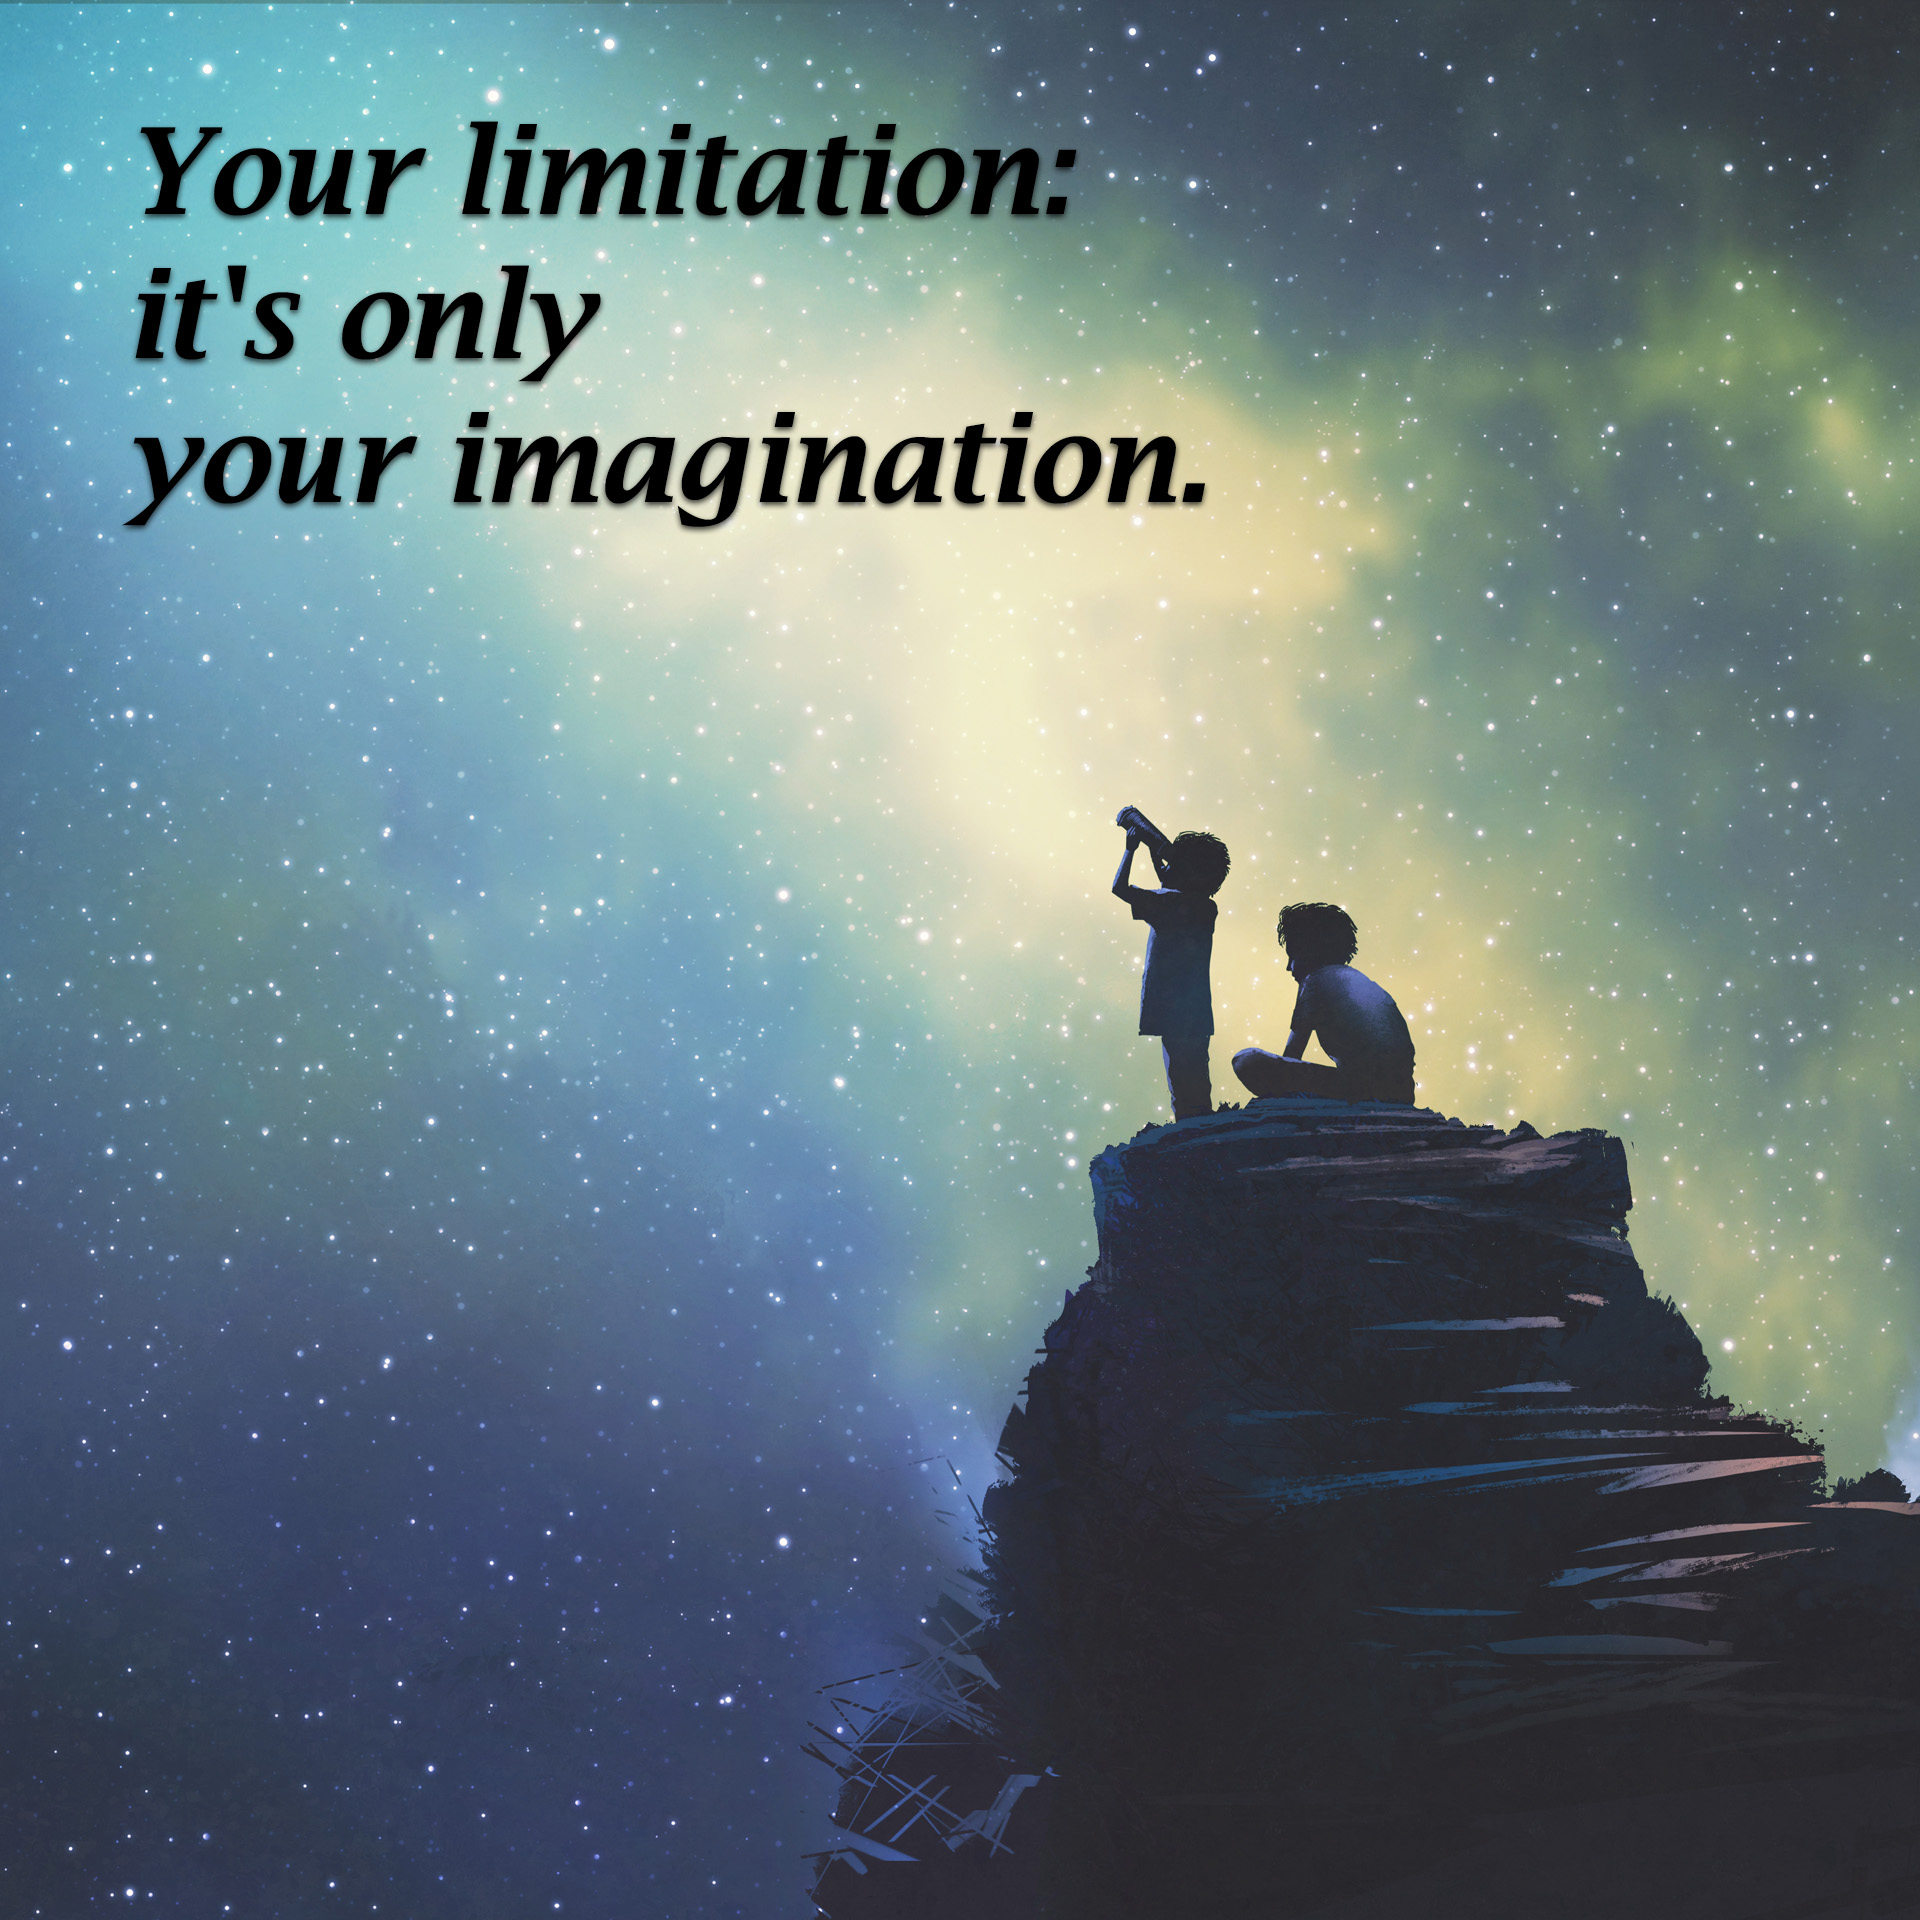 Your limitation: it's only your imagination.